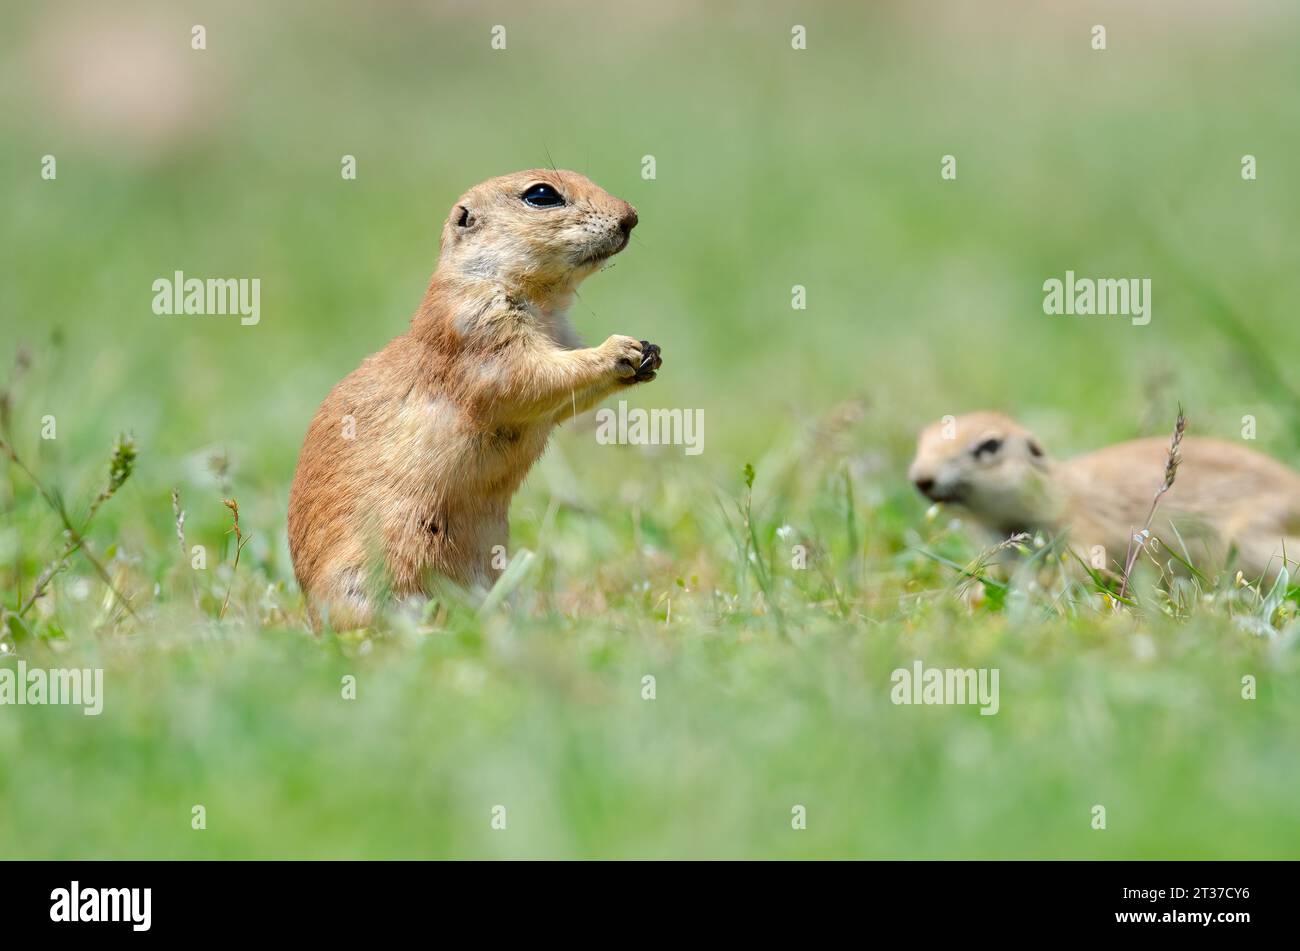 Cute funny animal ground squirrel. Green nature background. Stock Photo